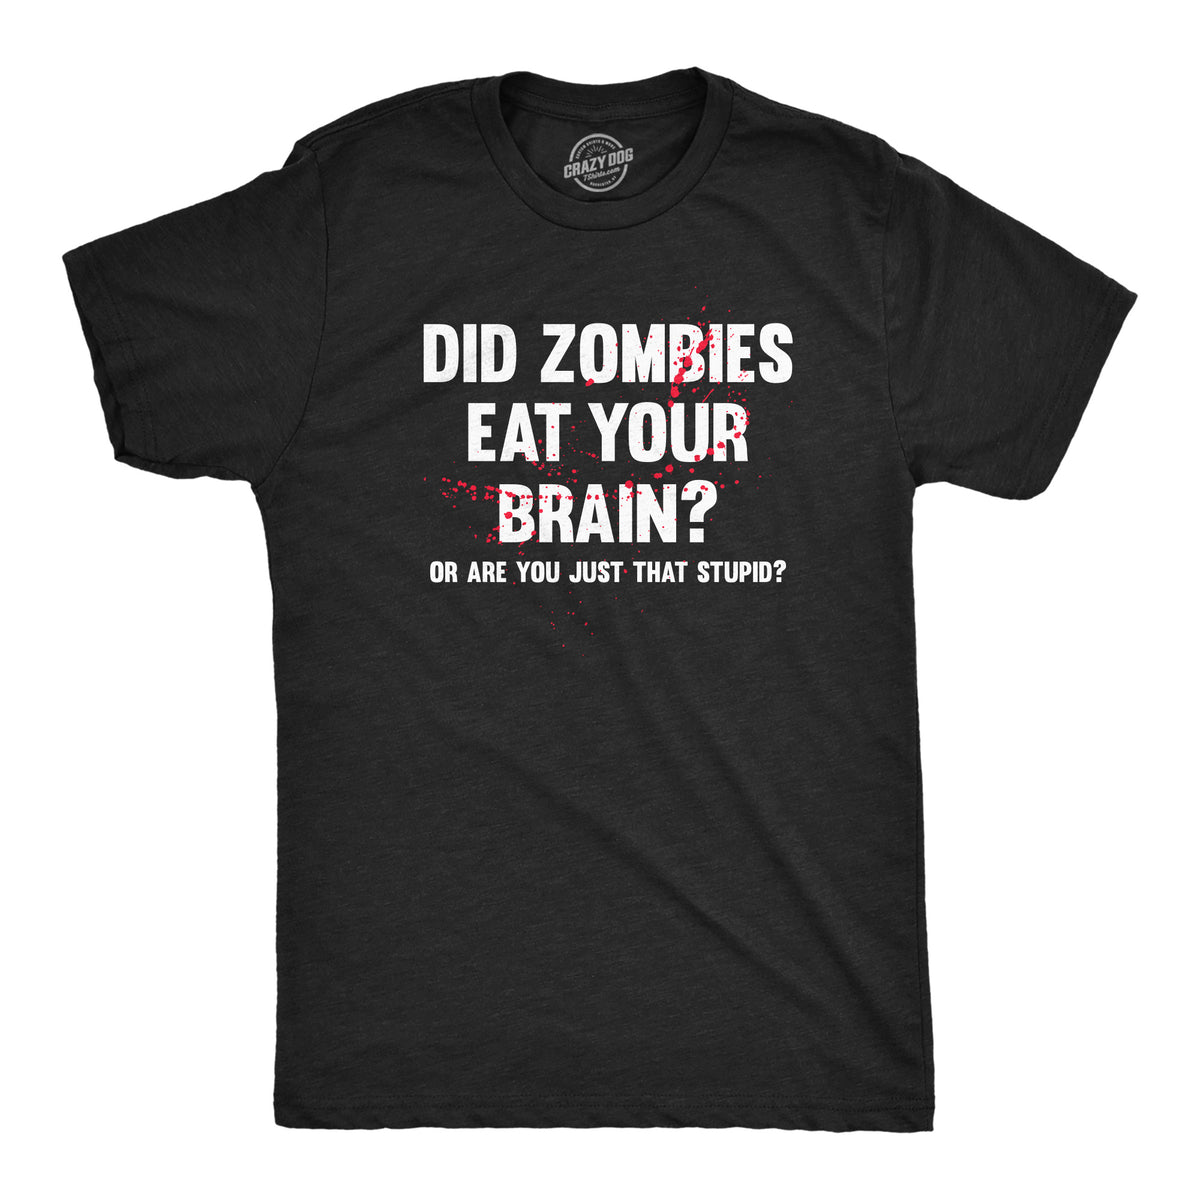 Funny Heather Black - BRAIN Did Zombies Eat Your Brain Or Are You Just That Stupid Mens T Shirt Nerdy zombie sarcastic Tee